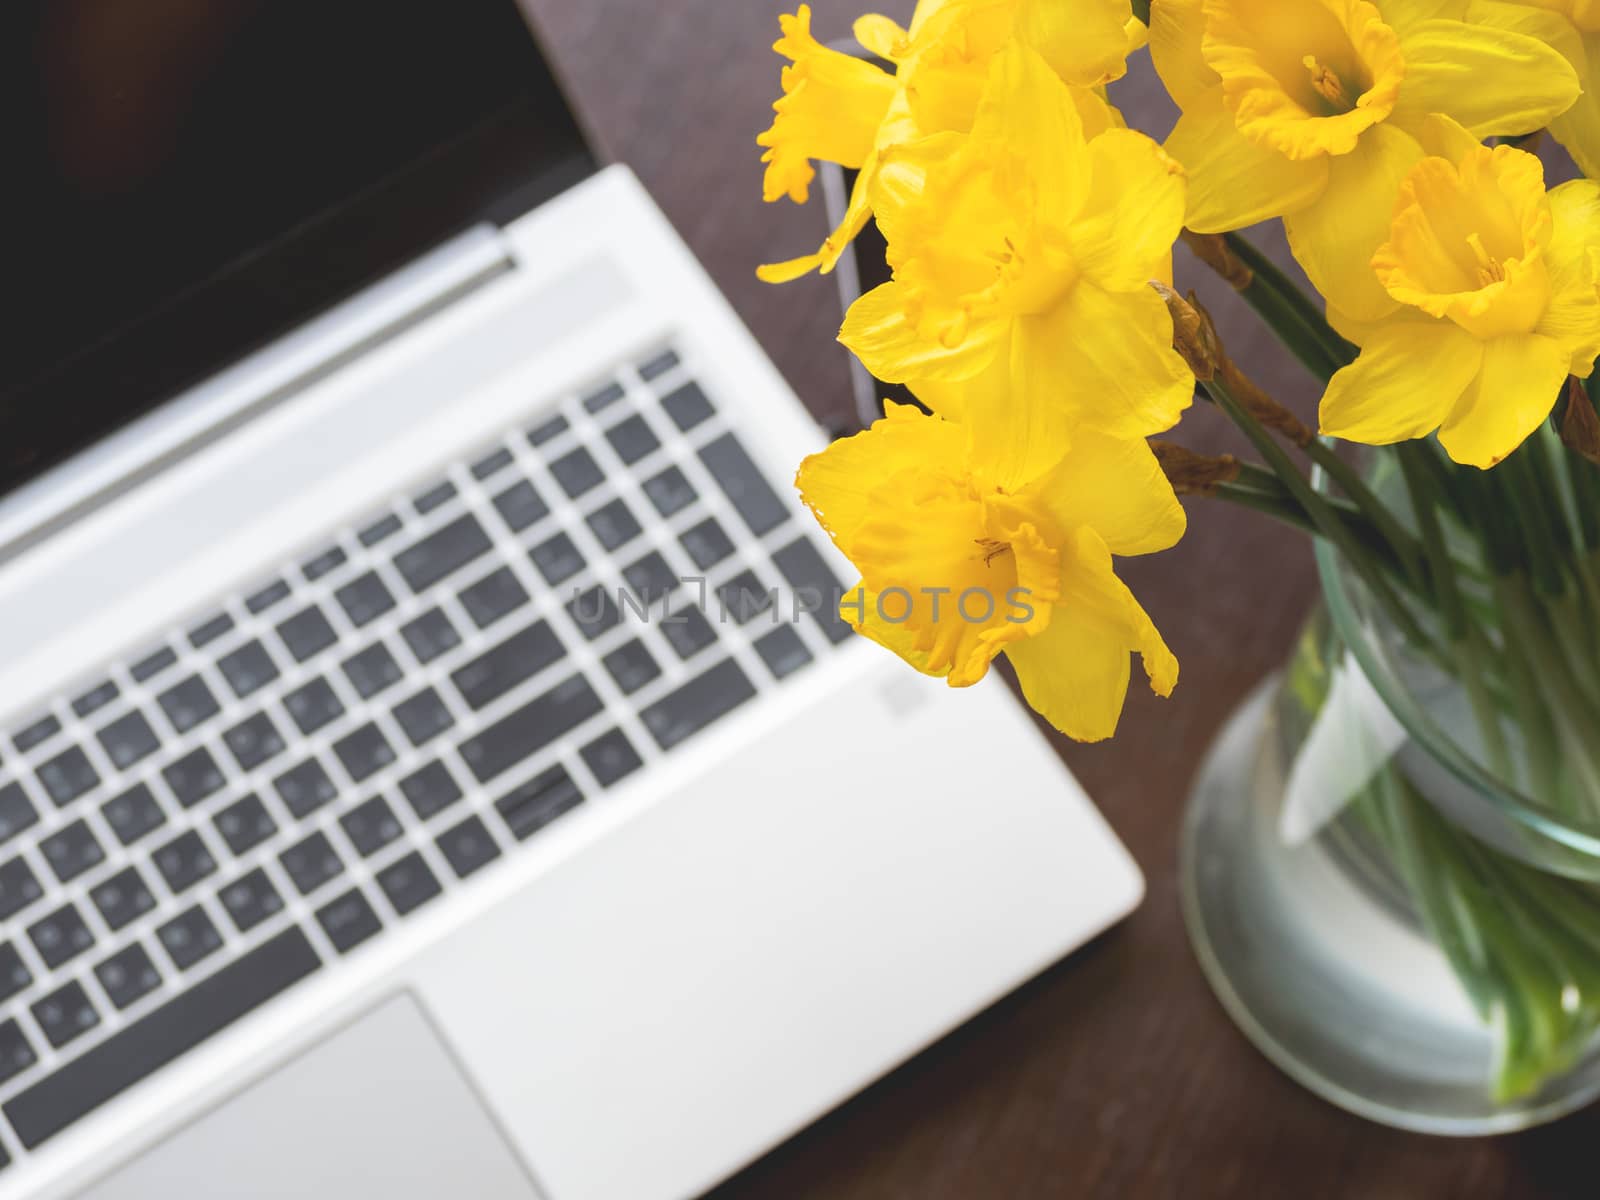 Bouquet of Narcissus or daffodils in glass vase over silver metal laptop. Bright yellow flowers with portable device. Wooden background.